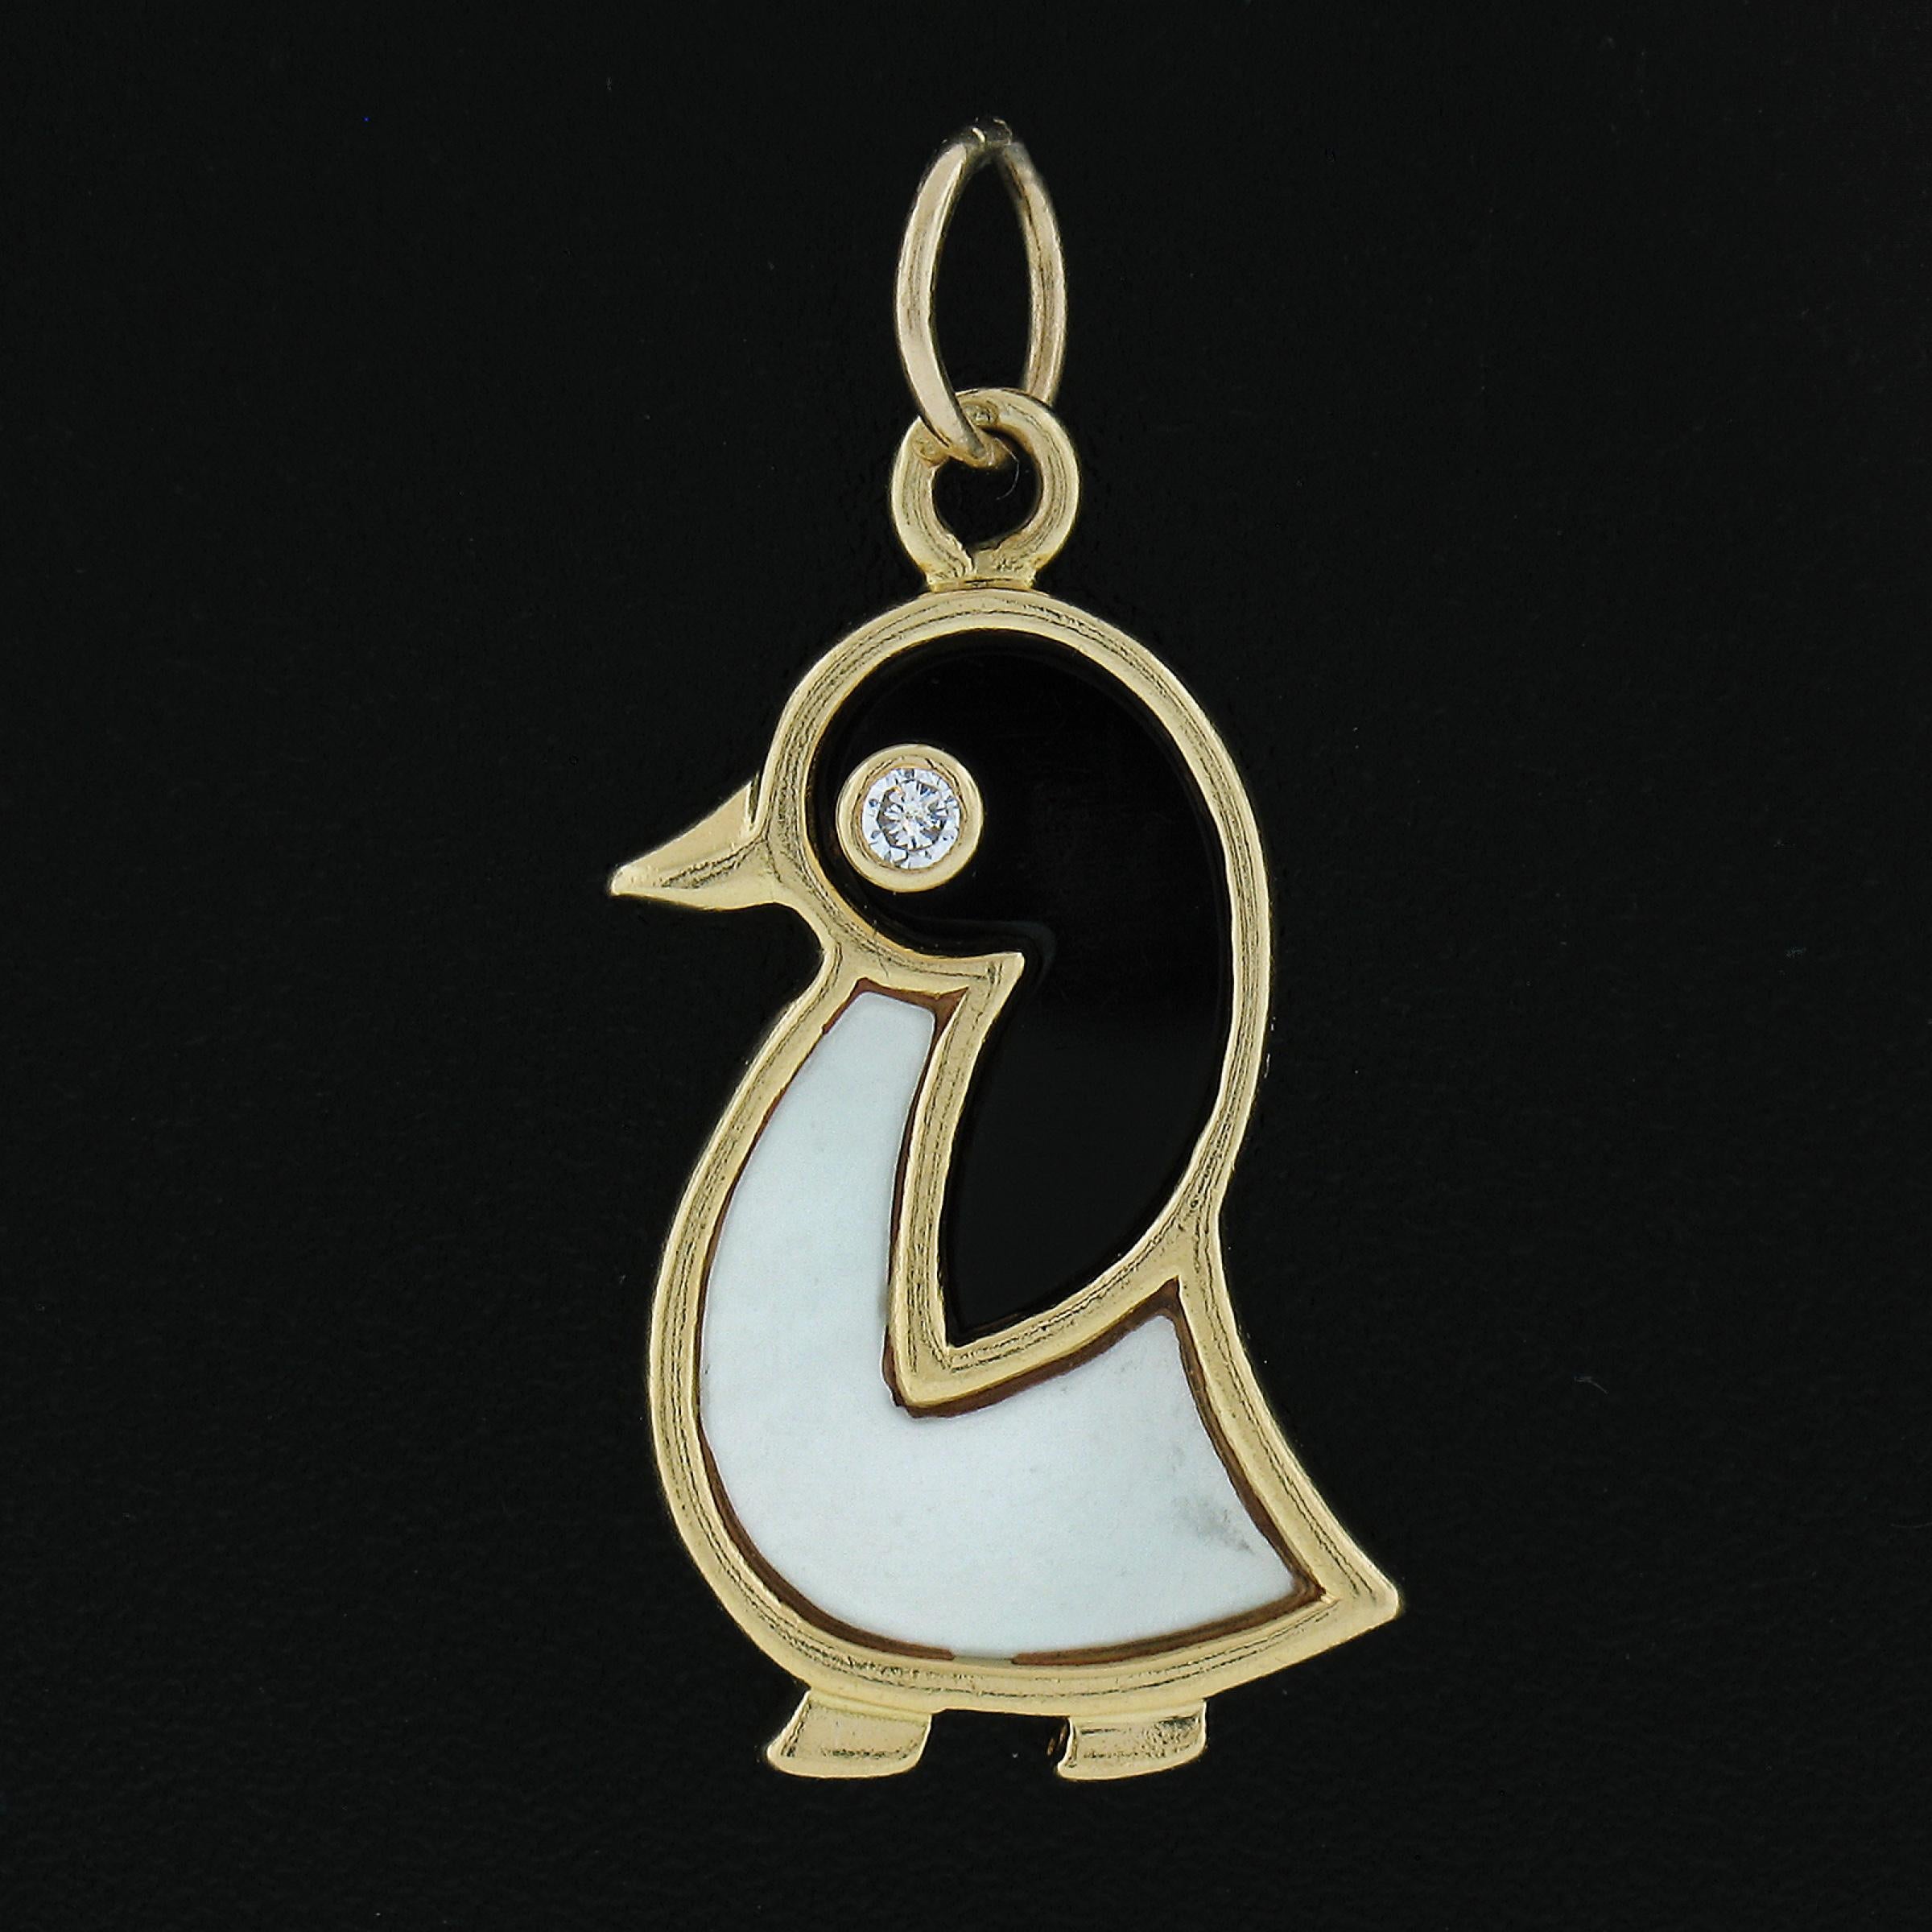 This adorable charm/pendant by Van Cleef & Arpels features custom cut black onyx and mother of pearl stones to create this cute penguin. The eye of the penguin is also set with a round brilliant cut diamond while the entire frame is crafted in solid